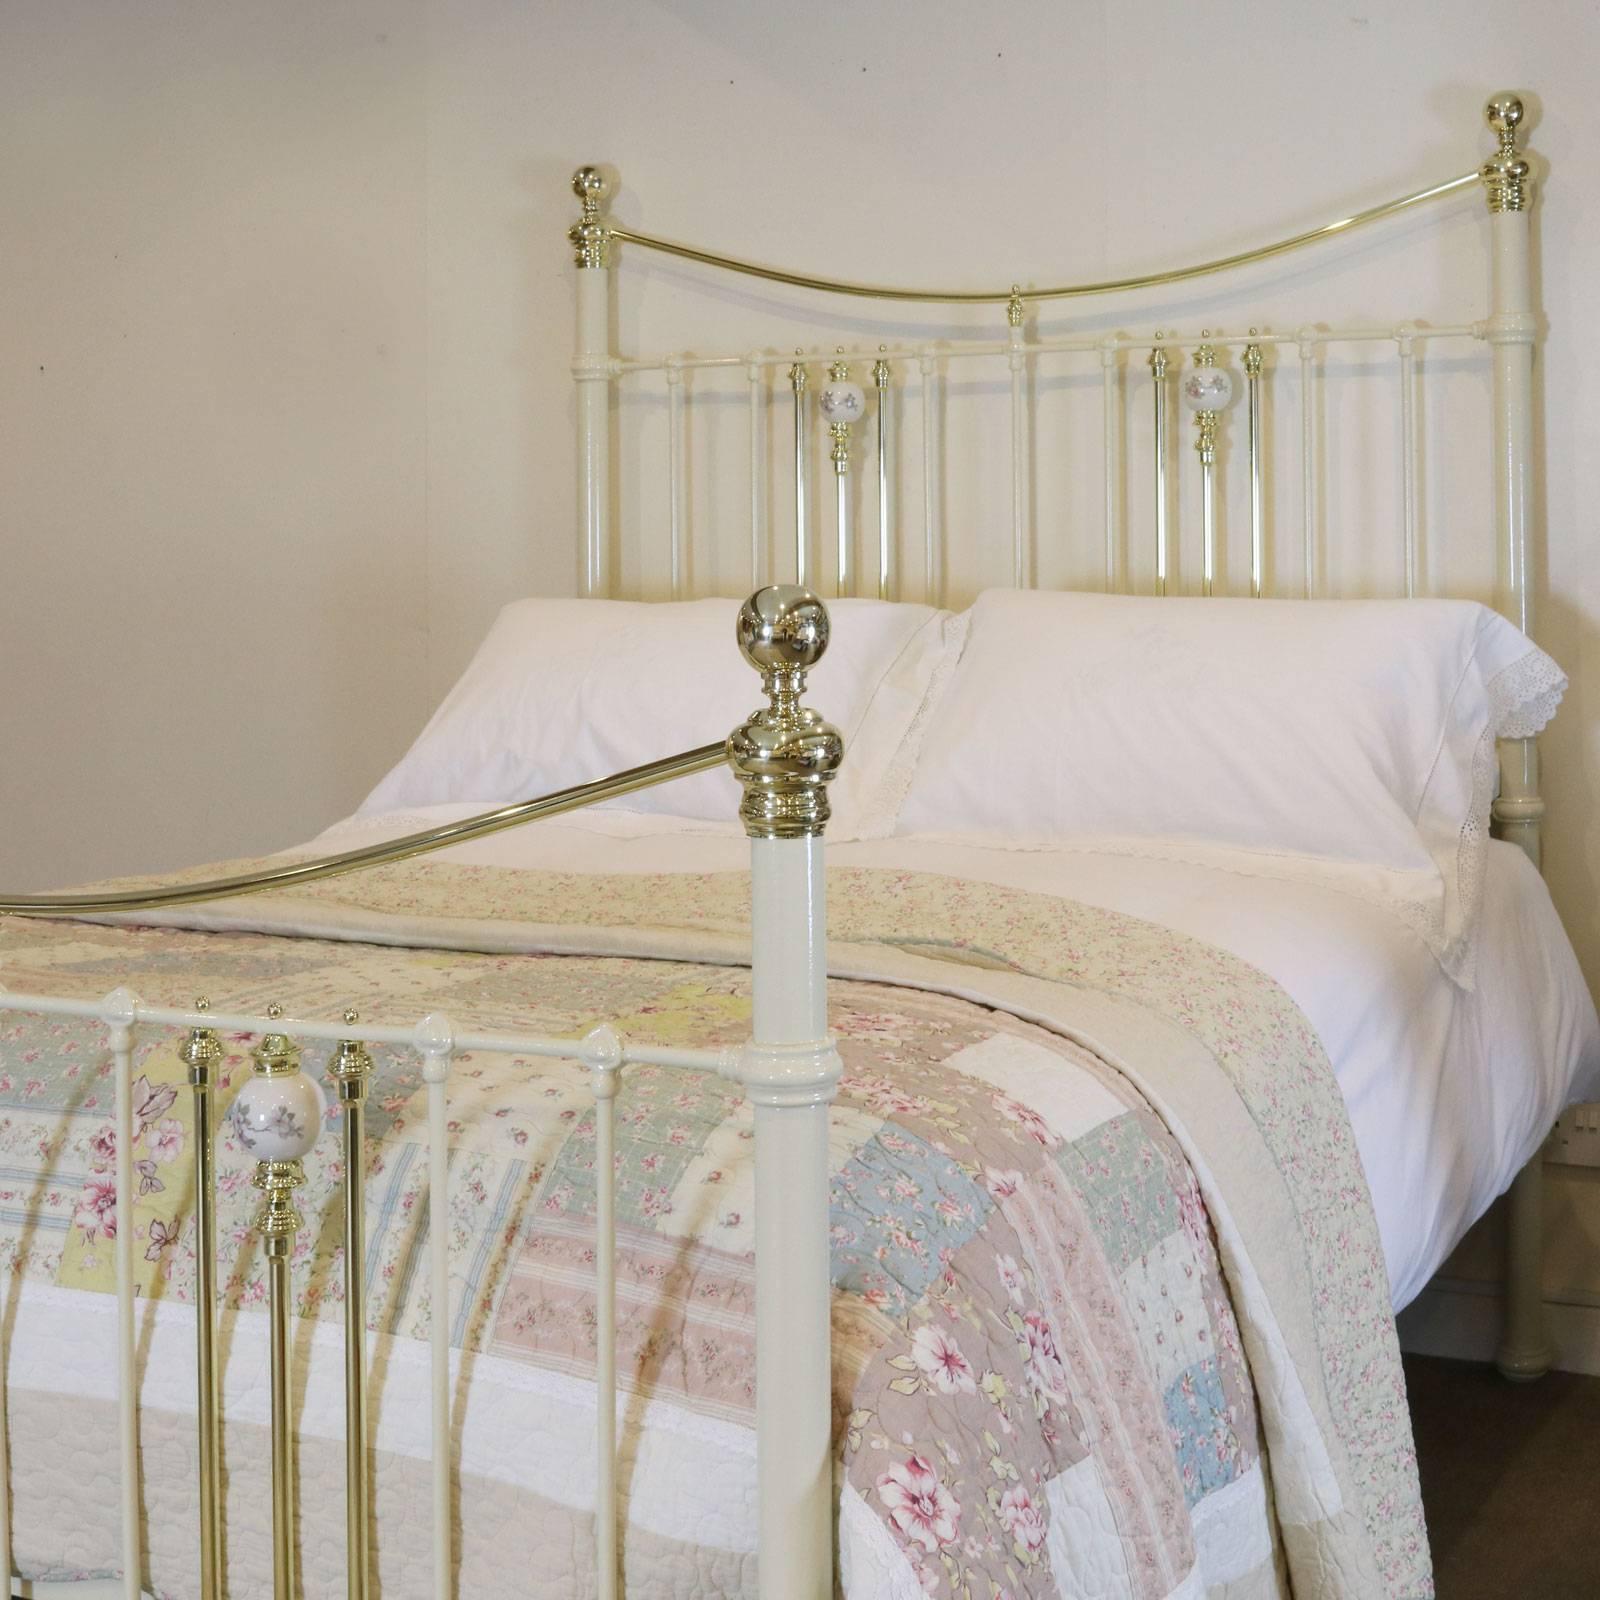 This fine bed adapted from an original Victorian bed with china ball decoration, triple brass down bars and curved brass top rail. It takes a 5 feet wide (60 in wide) British king-size or American queen-size base and mattress.

The price is for the